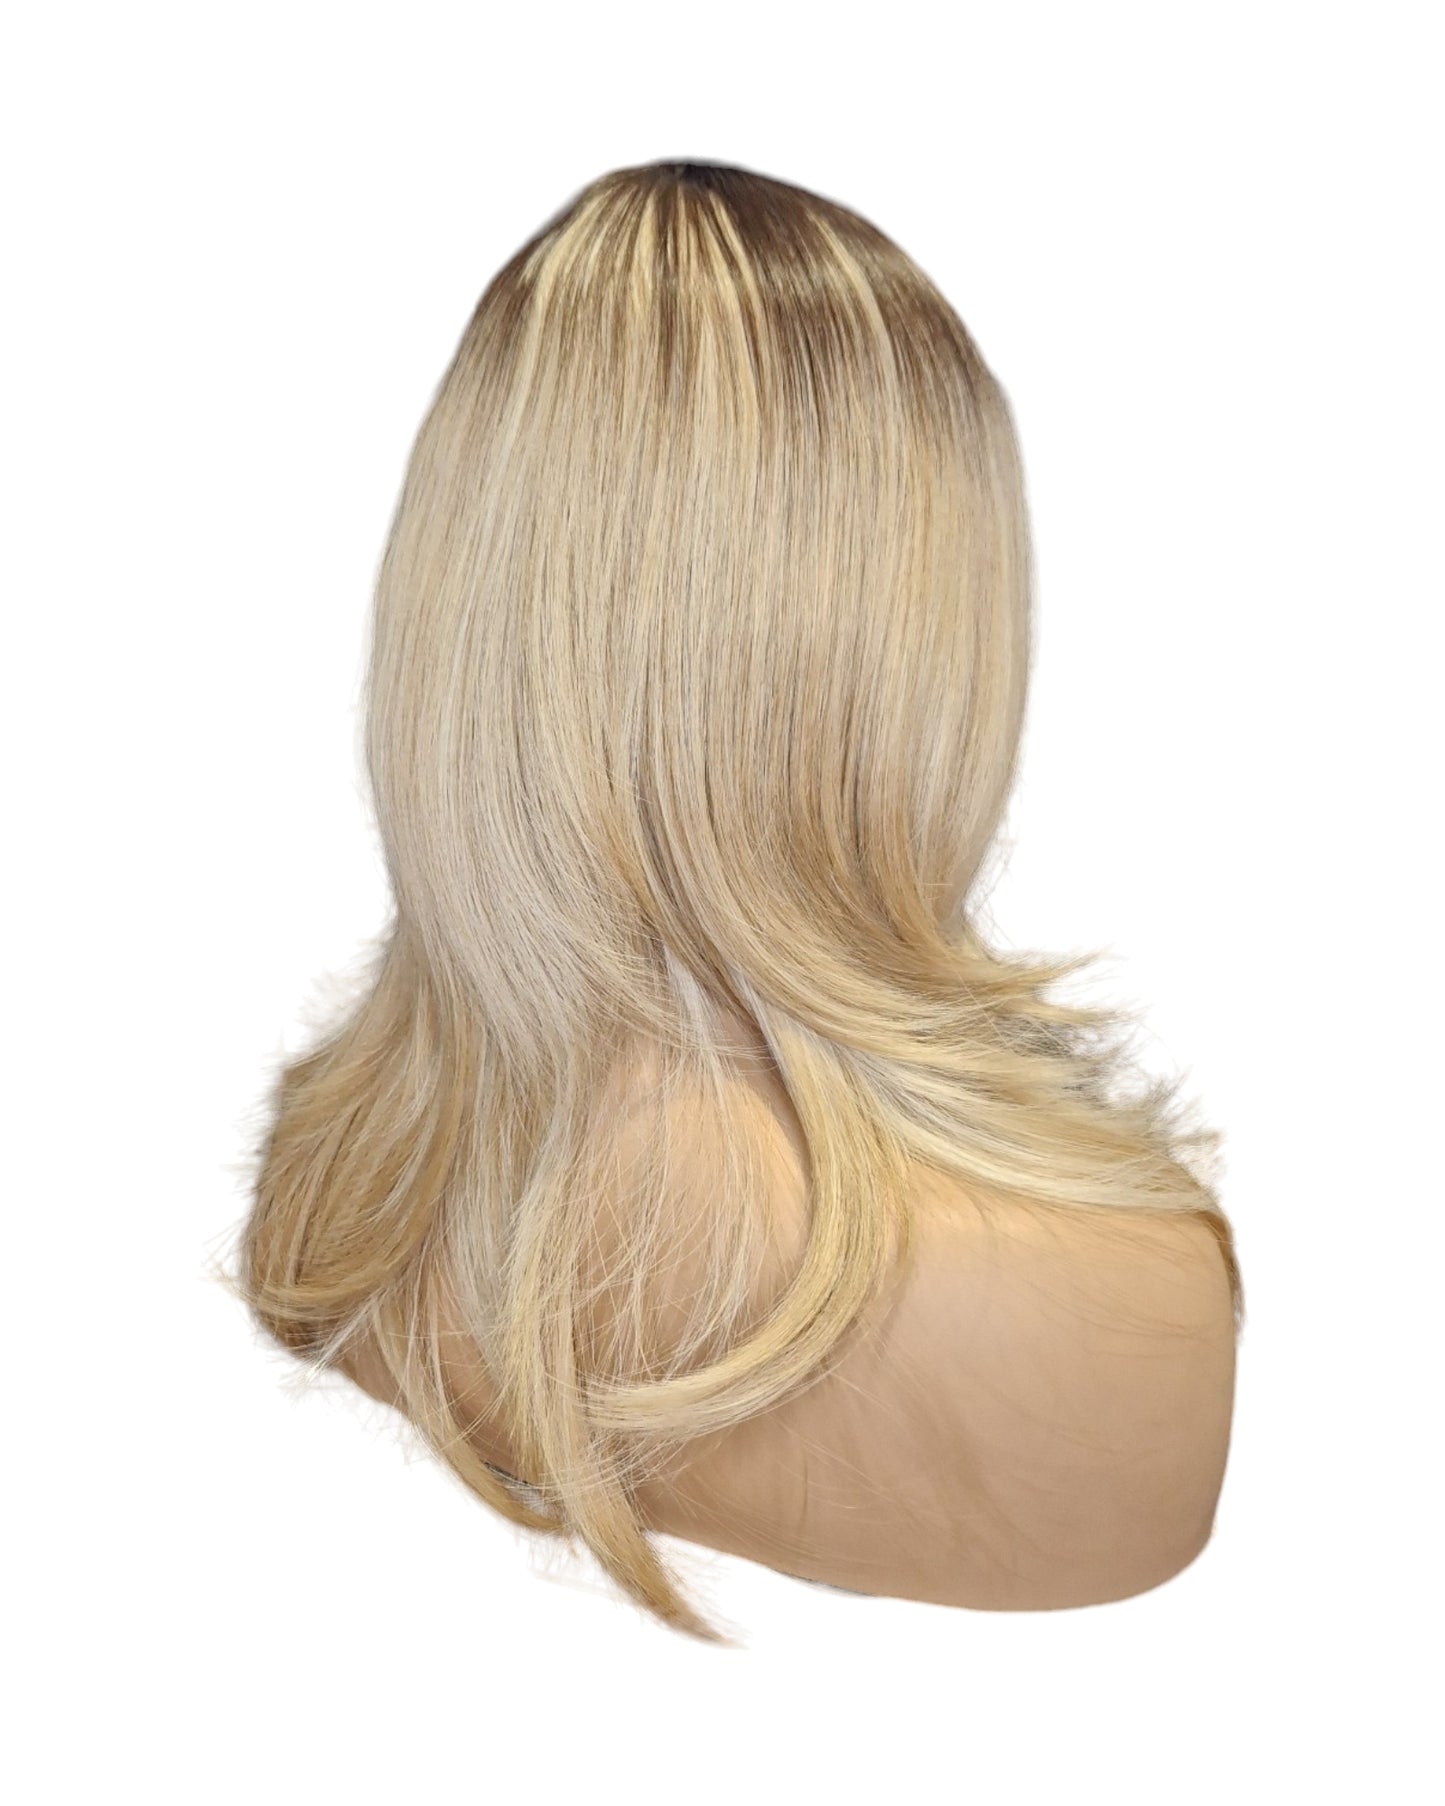 Sand Honey Blonde Ombre Rooted Layered Wig. Sandra